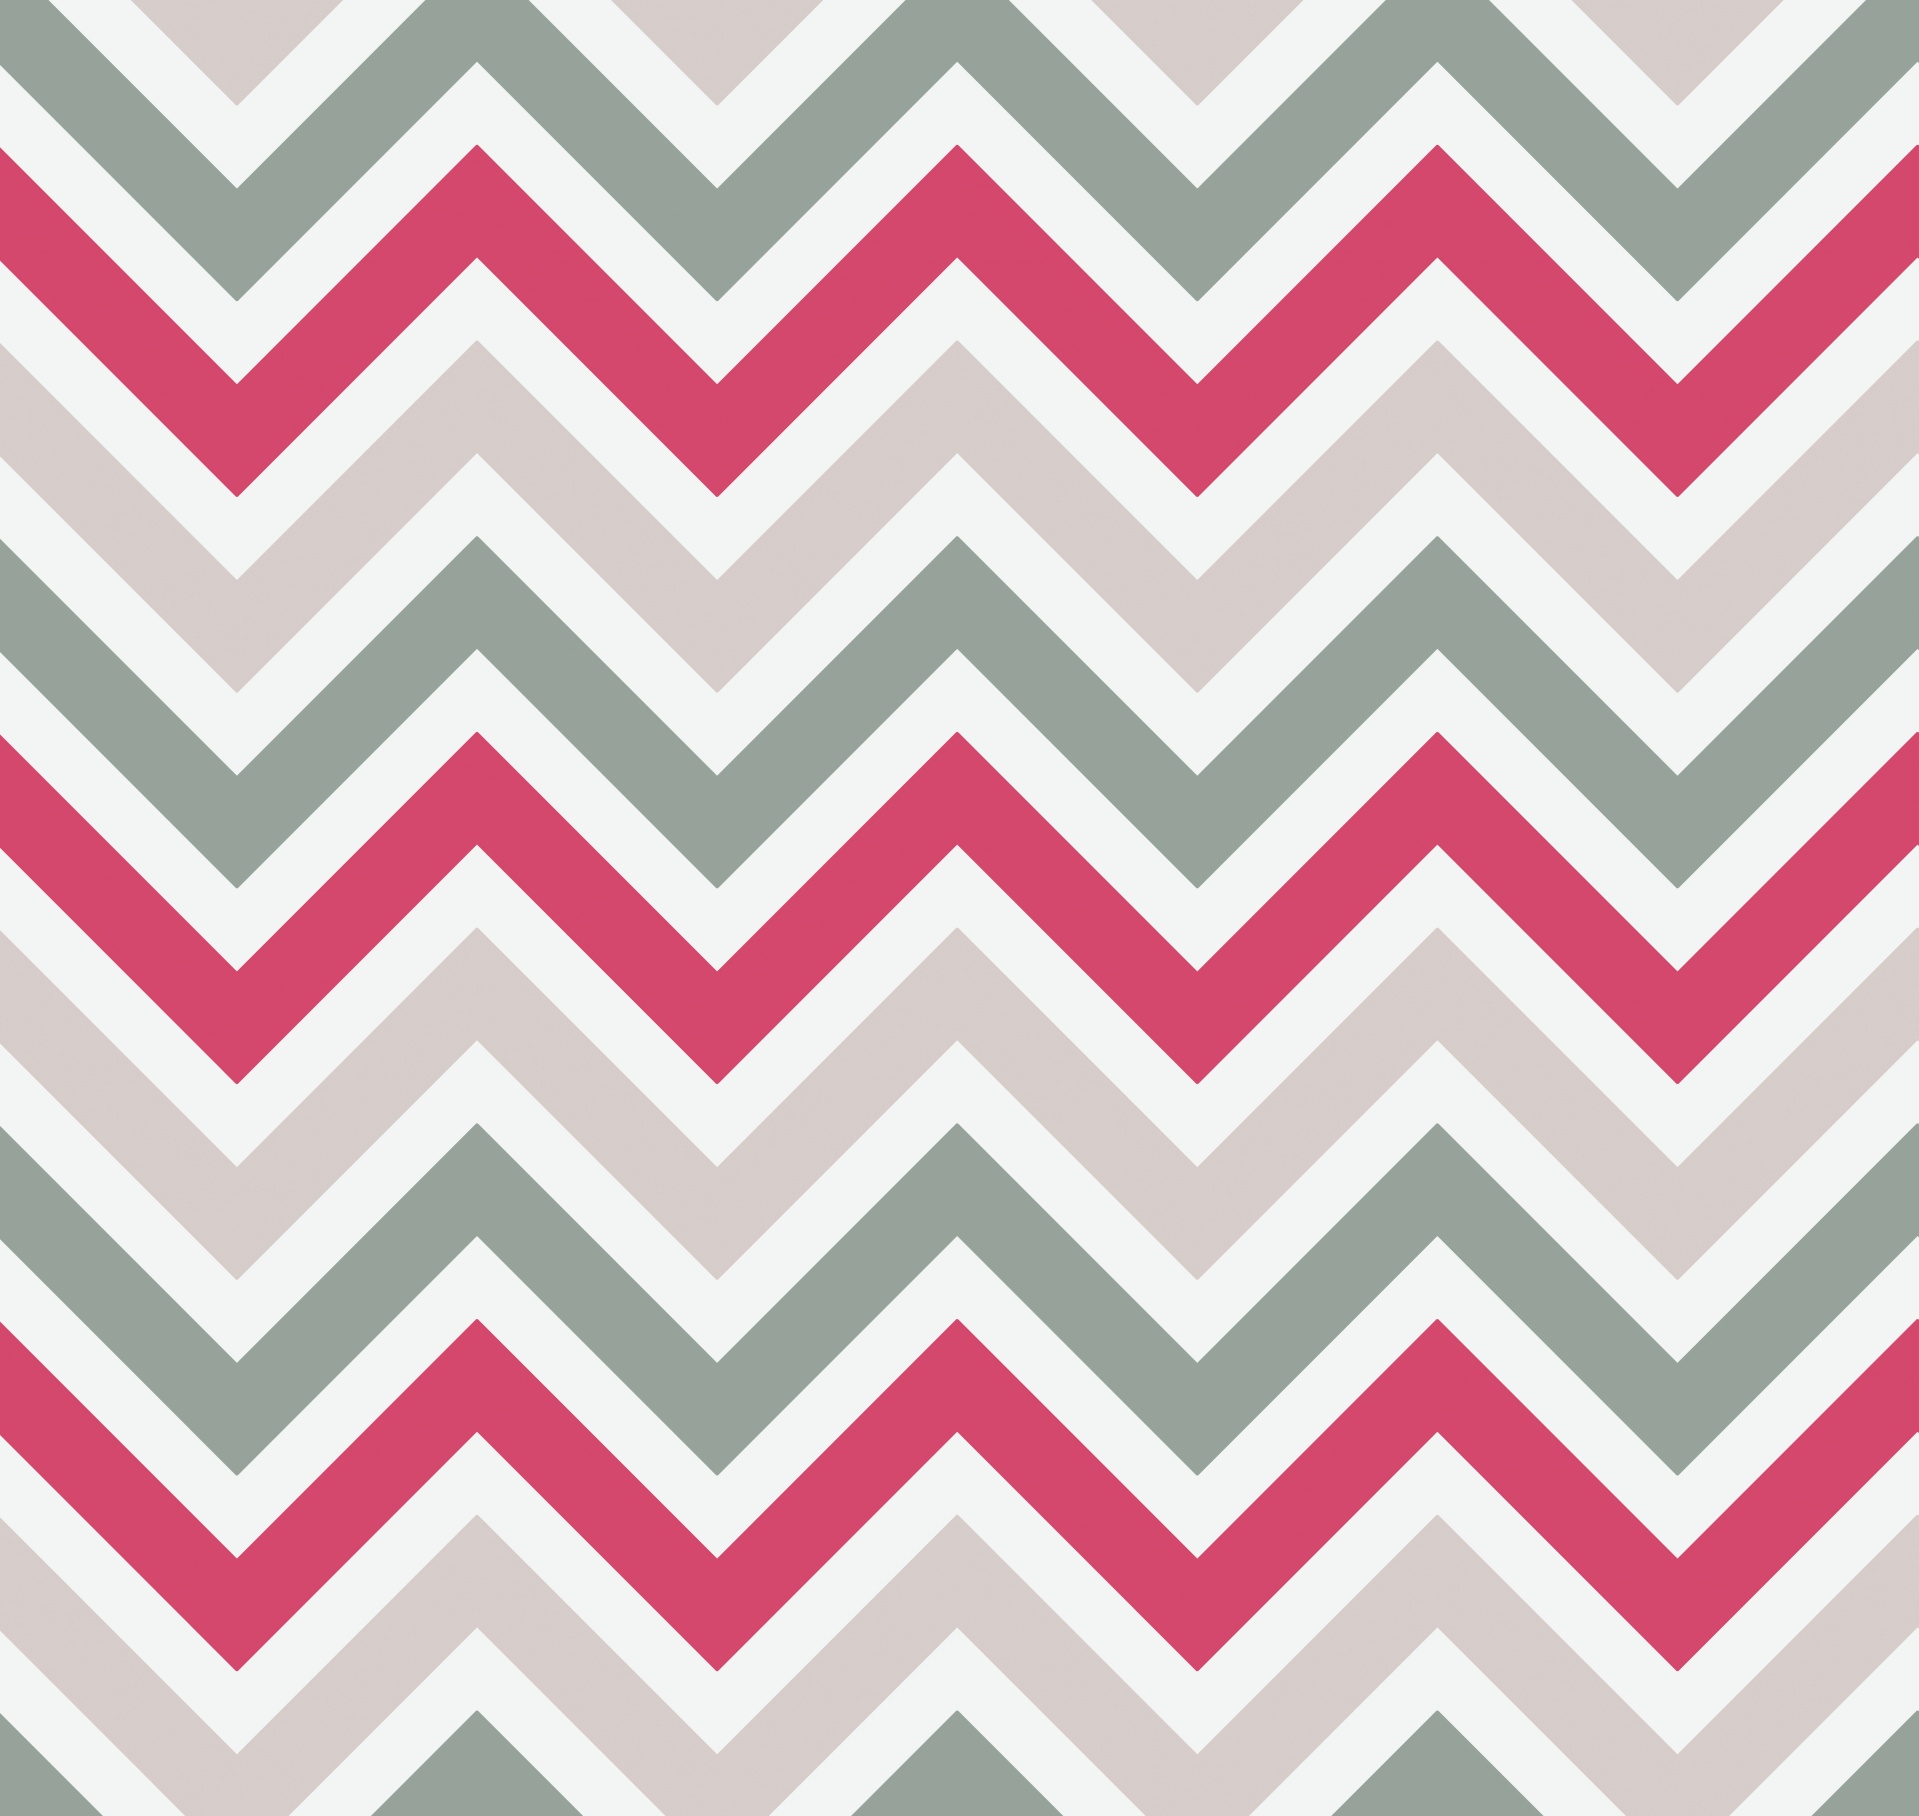 Chevrons in pinks and greys wallpaper background